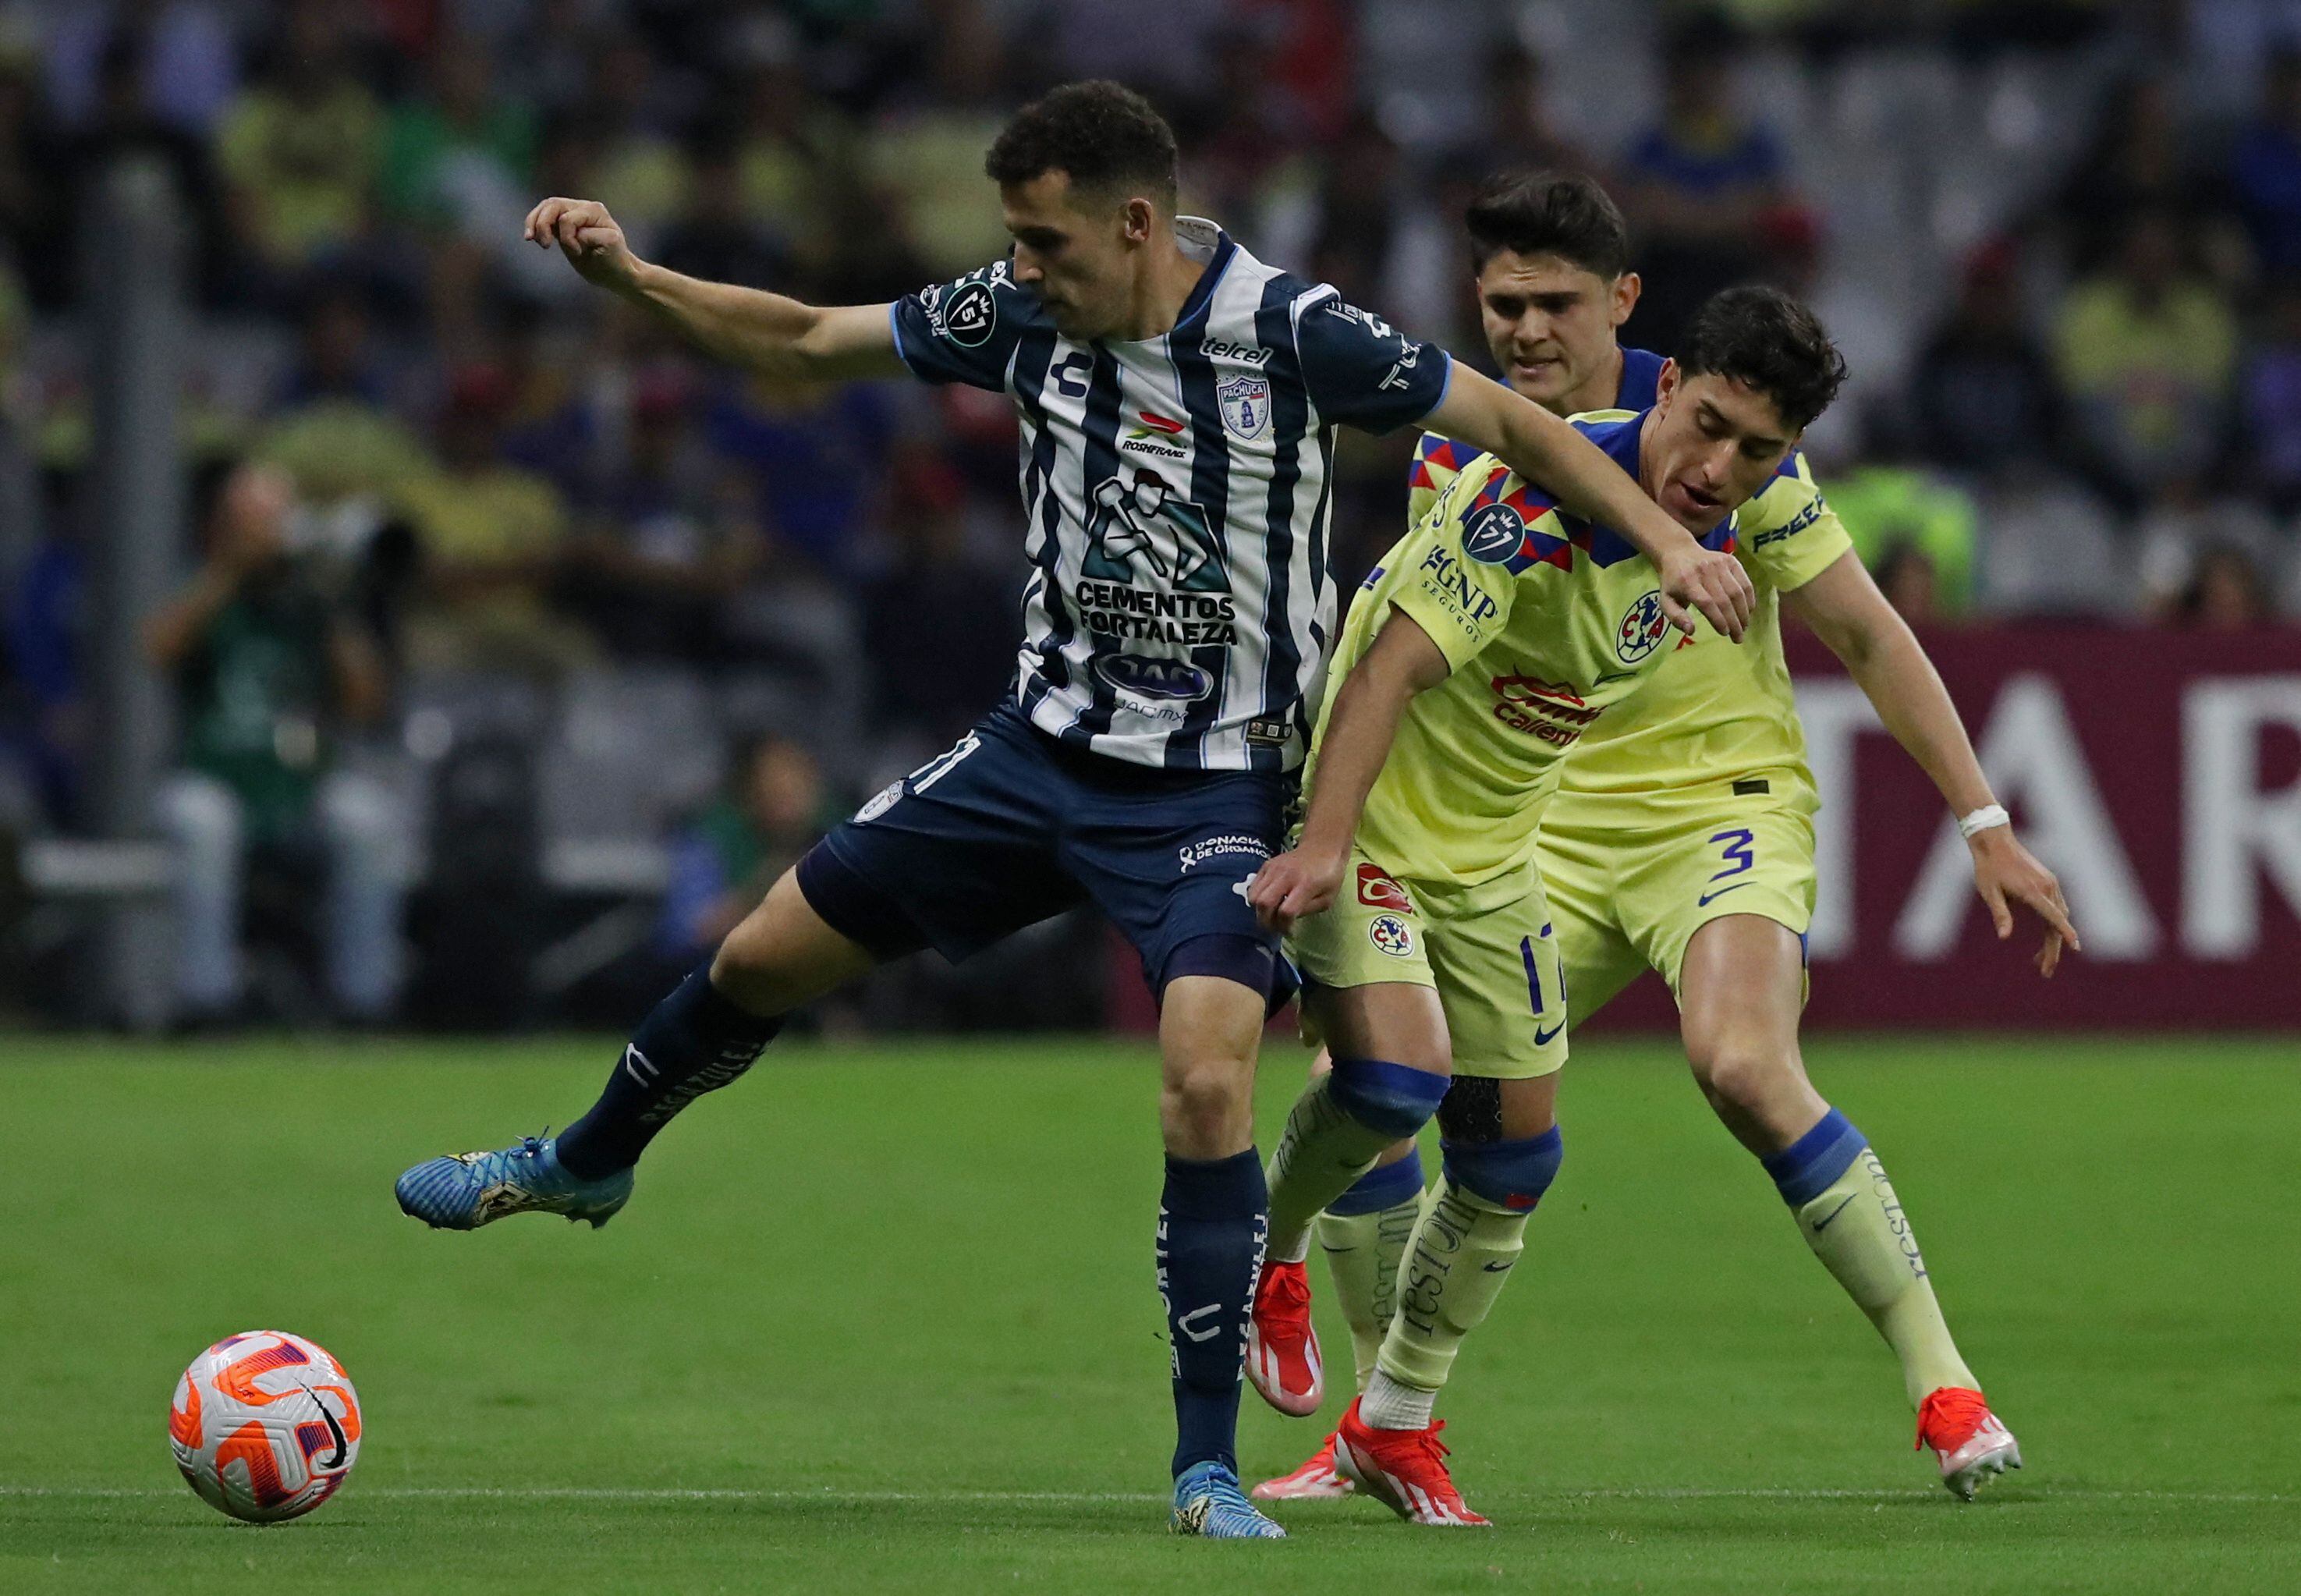 Soccer Football - CONCACAF Champions Cup - Semi Final - First Leg - America v Pachuca - Estadio Azteca, Mexico City, Mexico - Aprili 23, 2024 America's Alejandro Zendejas in action with Pachuca's Oussama Idrissi REUTERS/Henry Romero